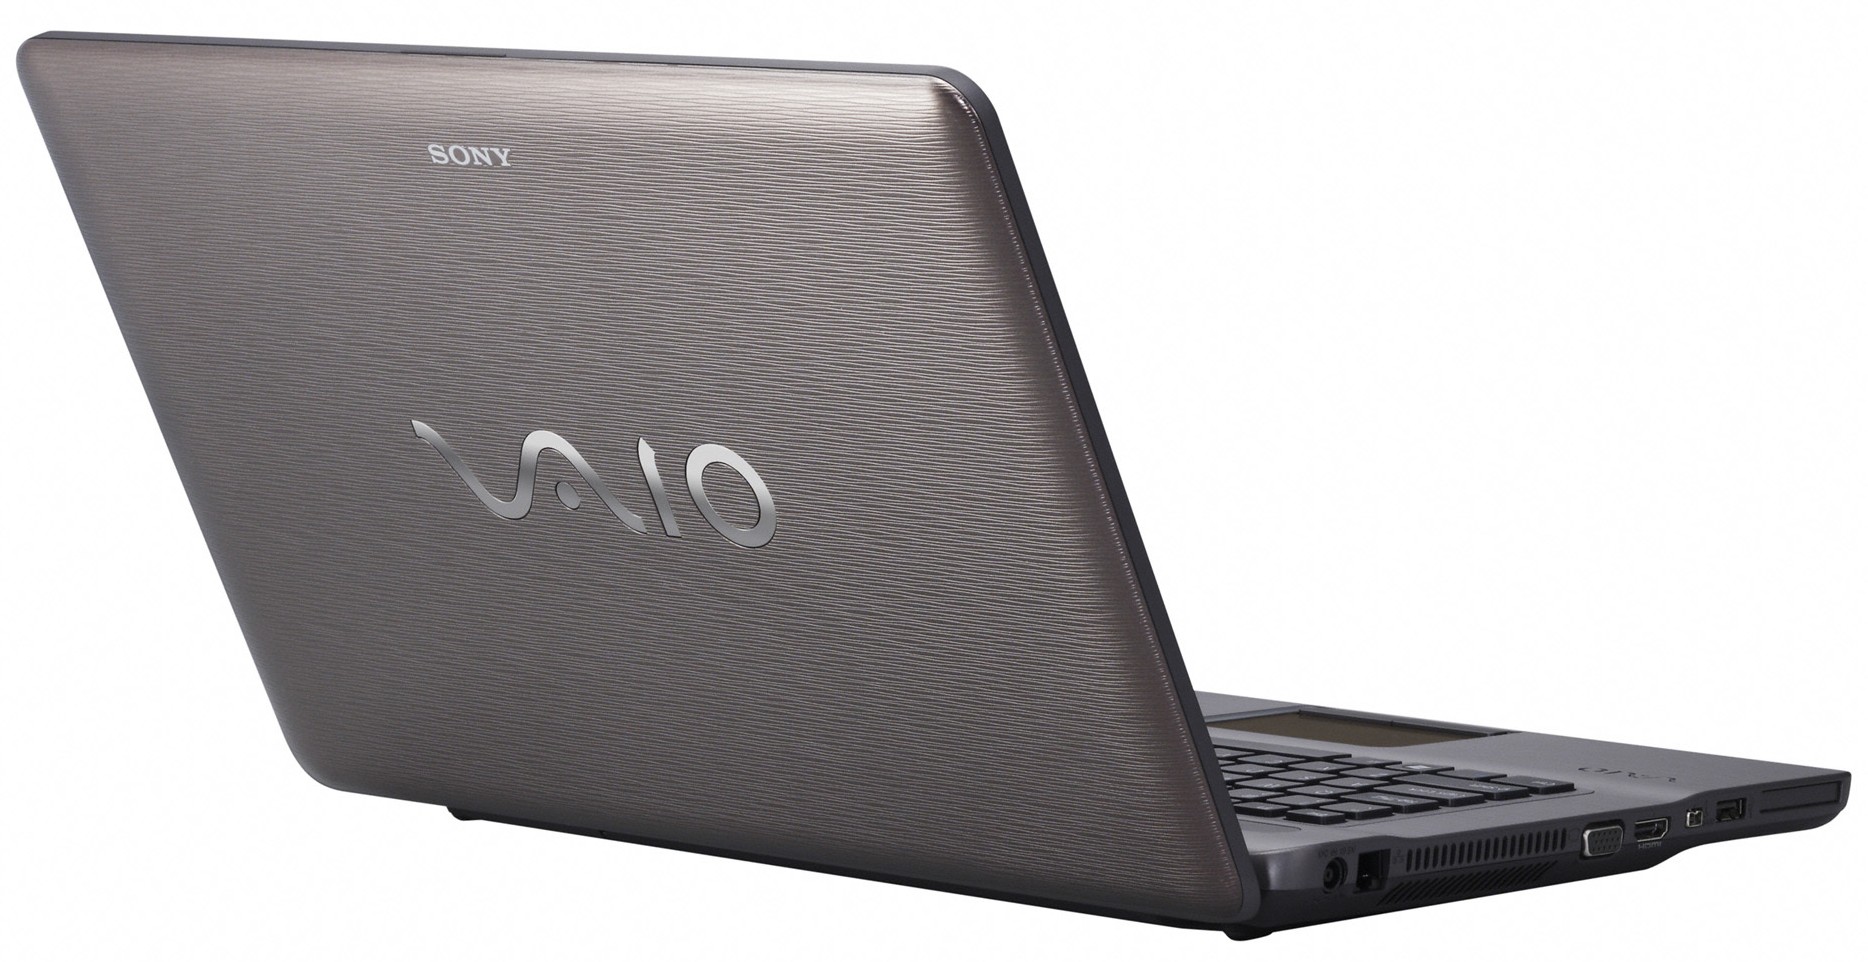 Sony VAIO NW: 15.5-inch Blu-ray notebook from $880